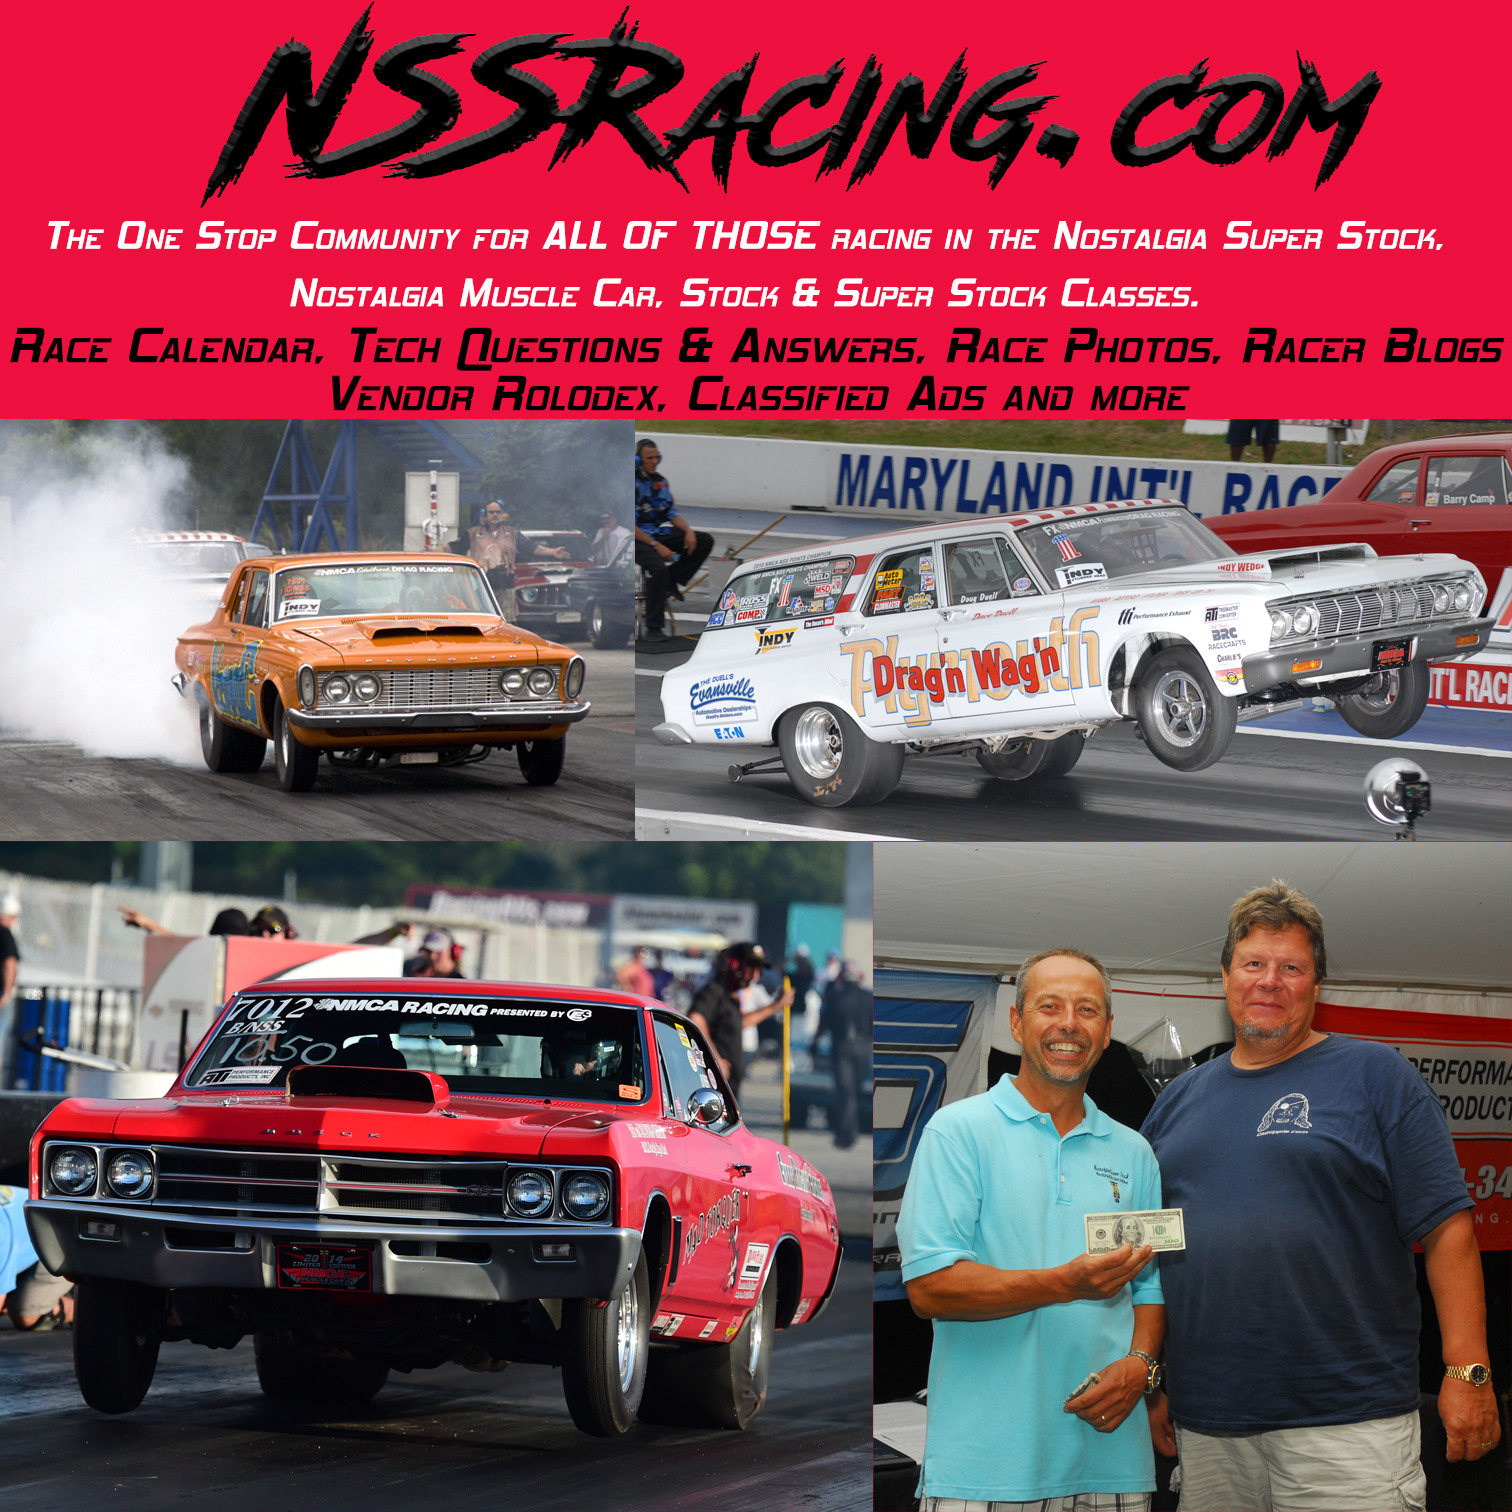 Check Out the NSS Racing Forums